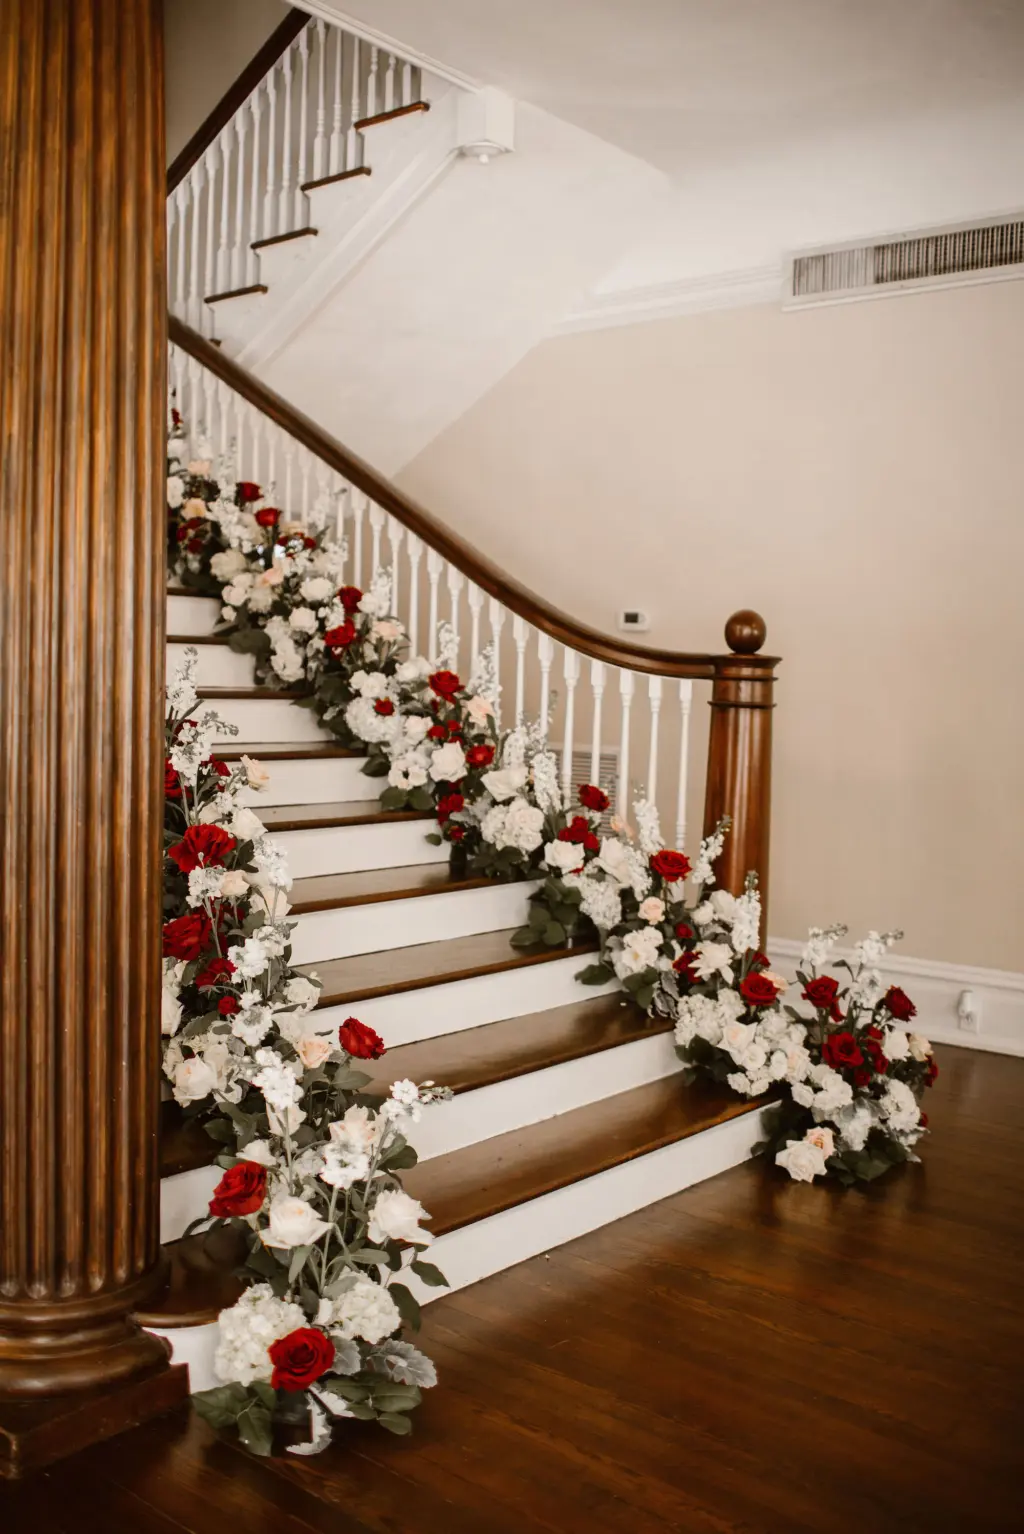 White and Burgundy Rose Flower Arrangements for Stairs at Wedding Reception Inspiration